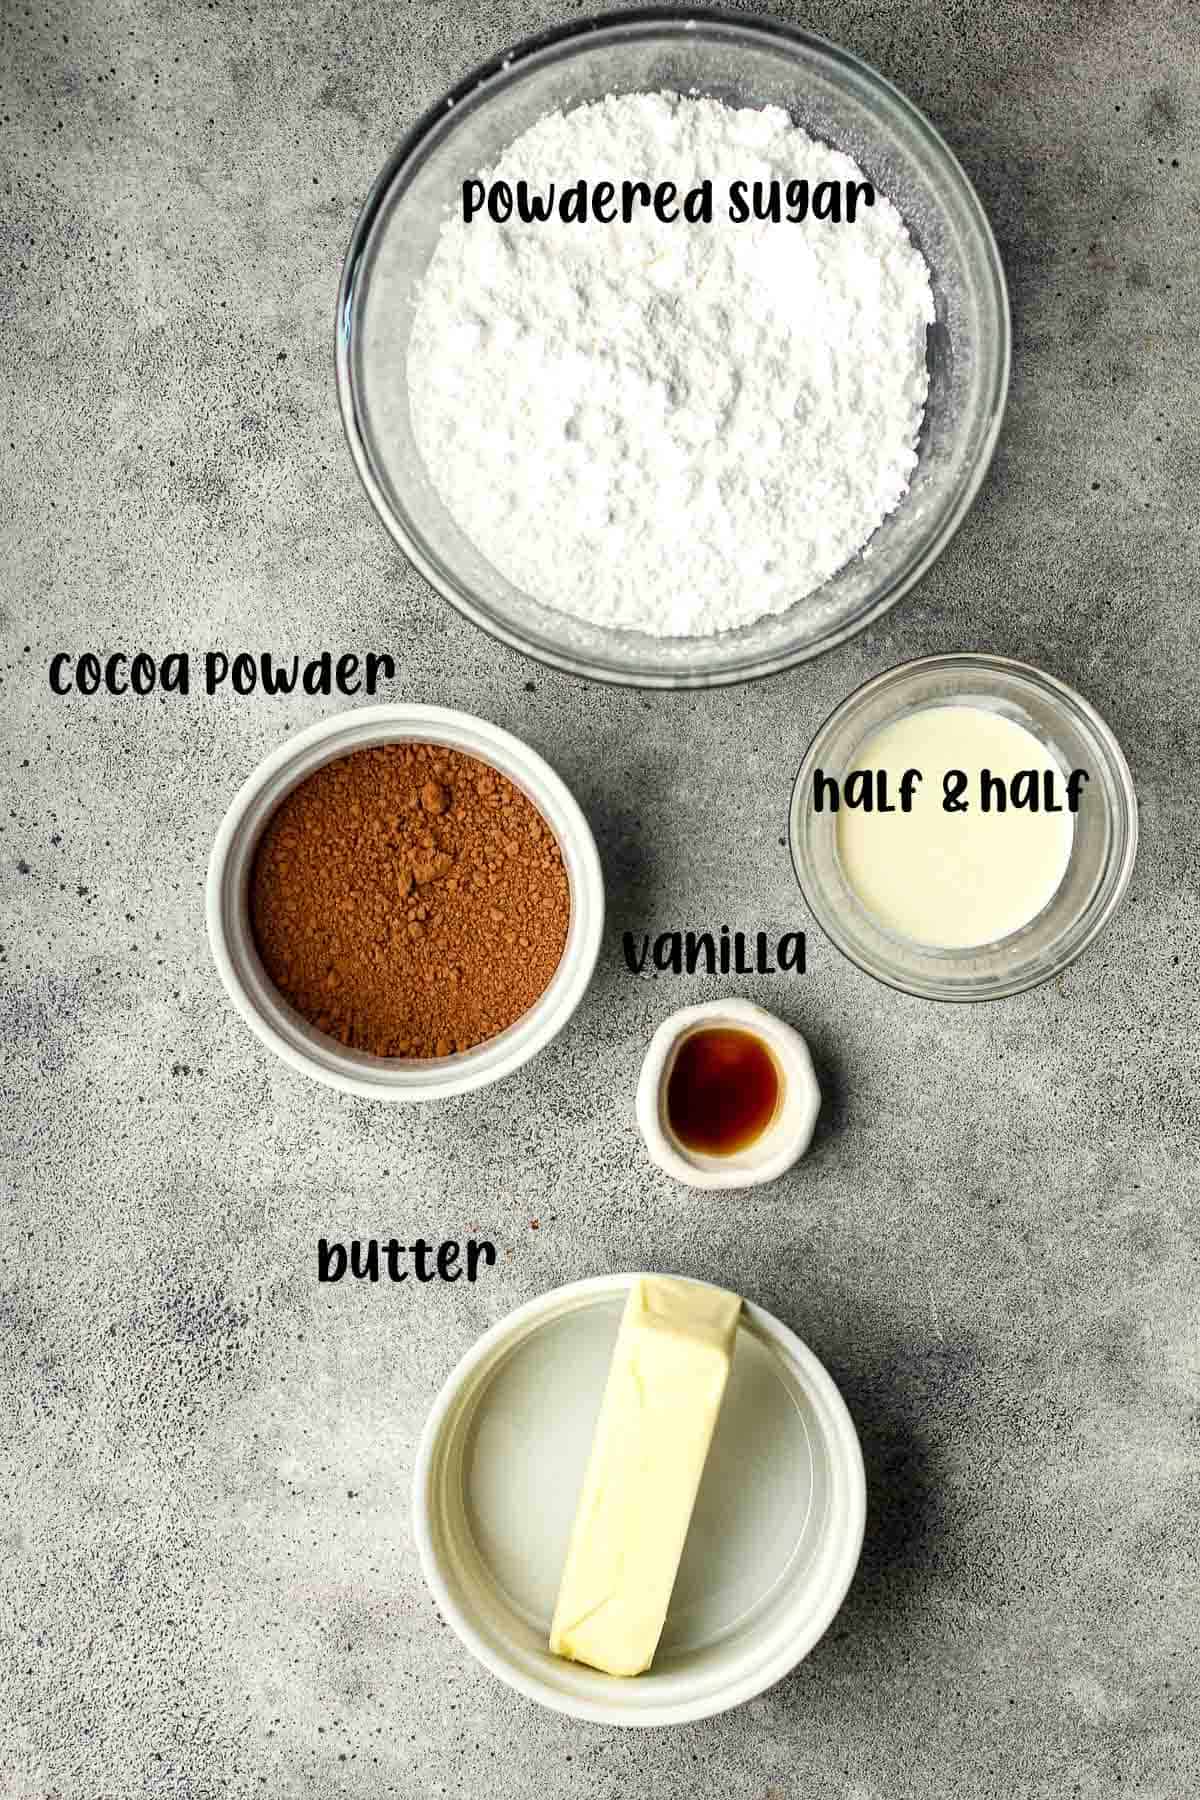 Labeled ingredients for chocolate buttercream.